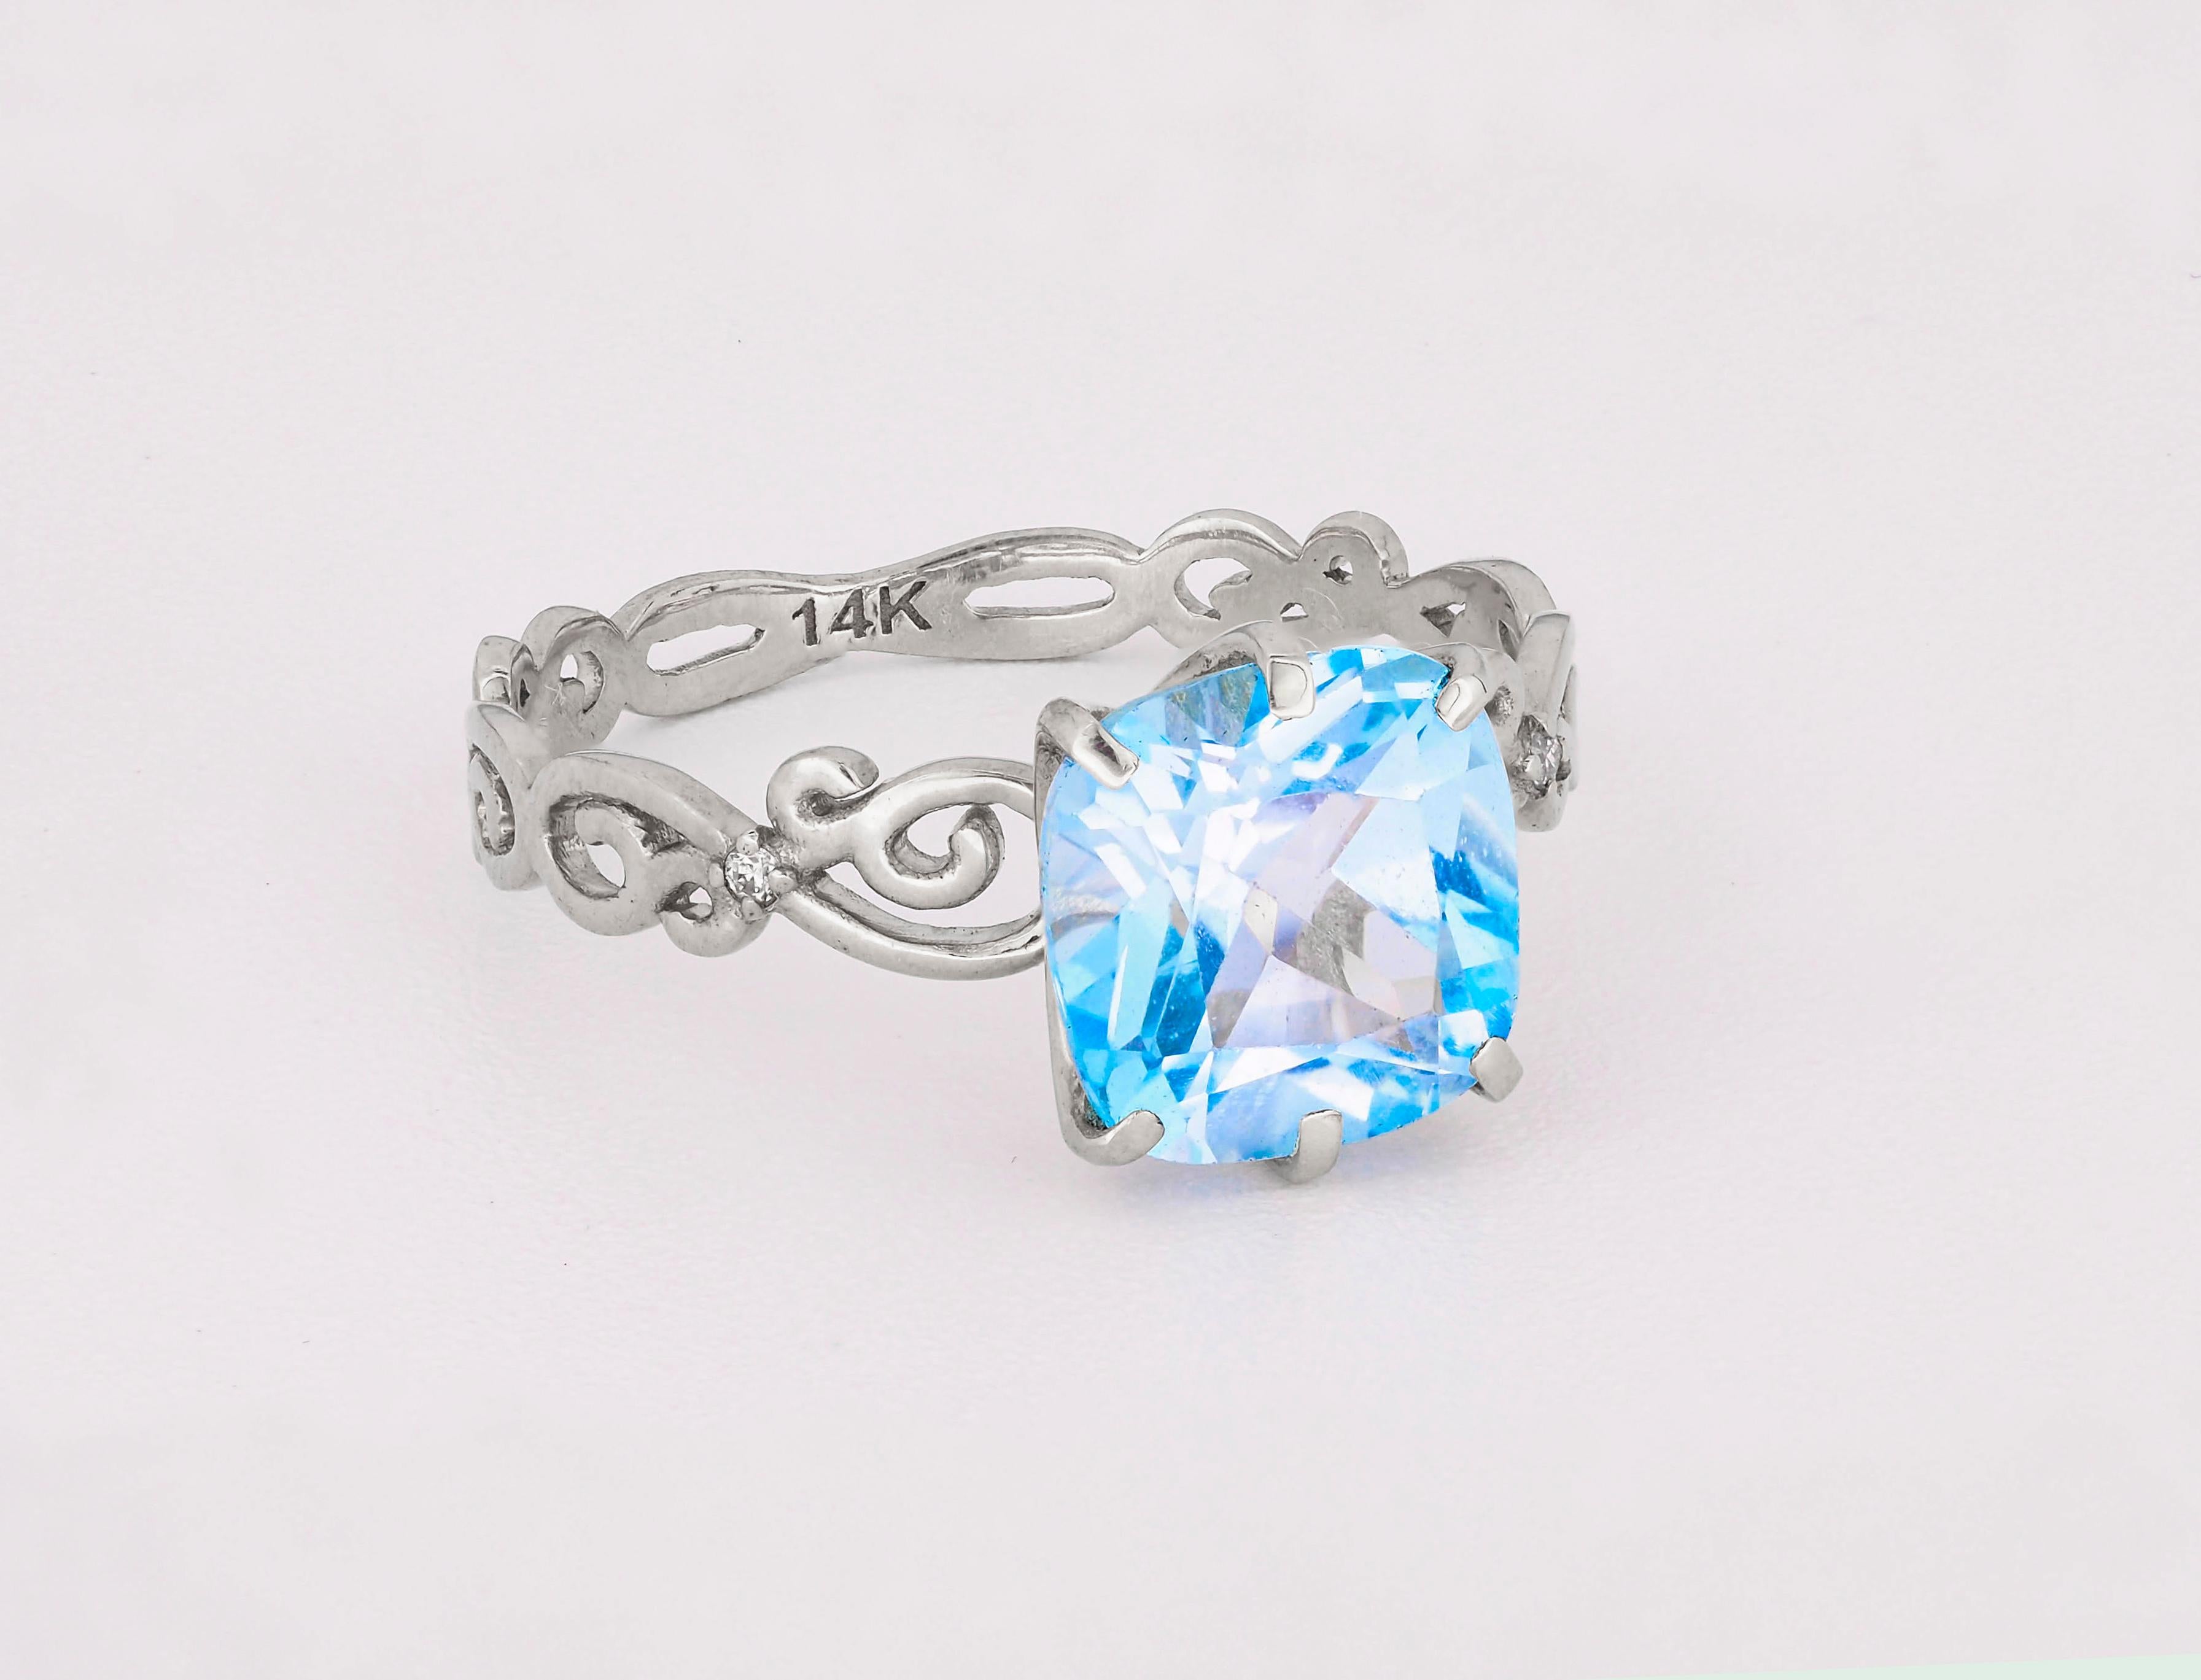 14 k solid gold ring with natural topaz and diamonds. November birthstone.
Weight: 2.00 g.

Central stone: Natural topaz
Cushion cut, weight - approx 3.00 ct. in total, color - blue
Clarity: Transparent with inclusions
Surrounding stones: 
Diamonds: